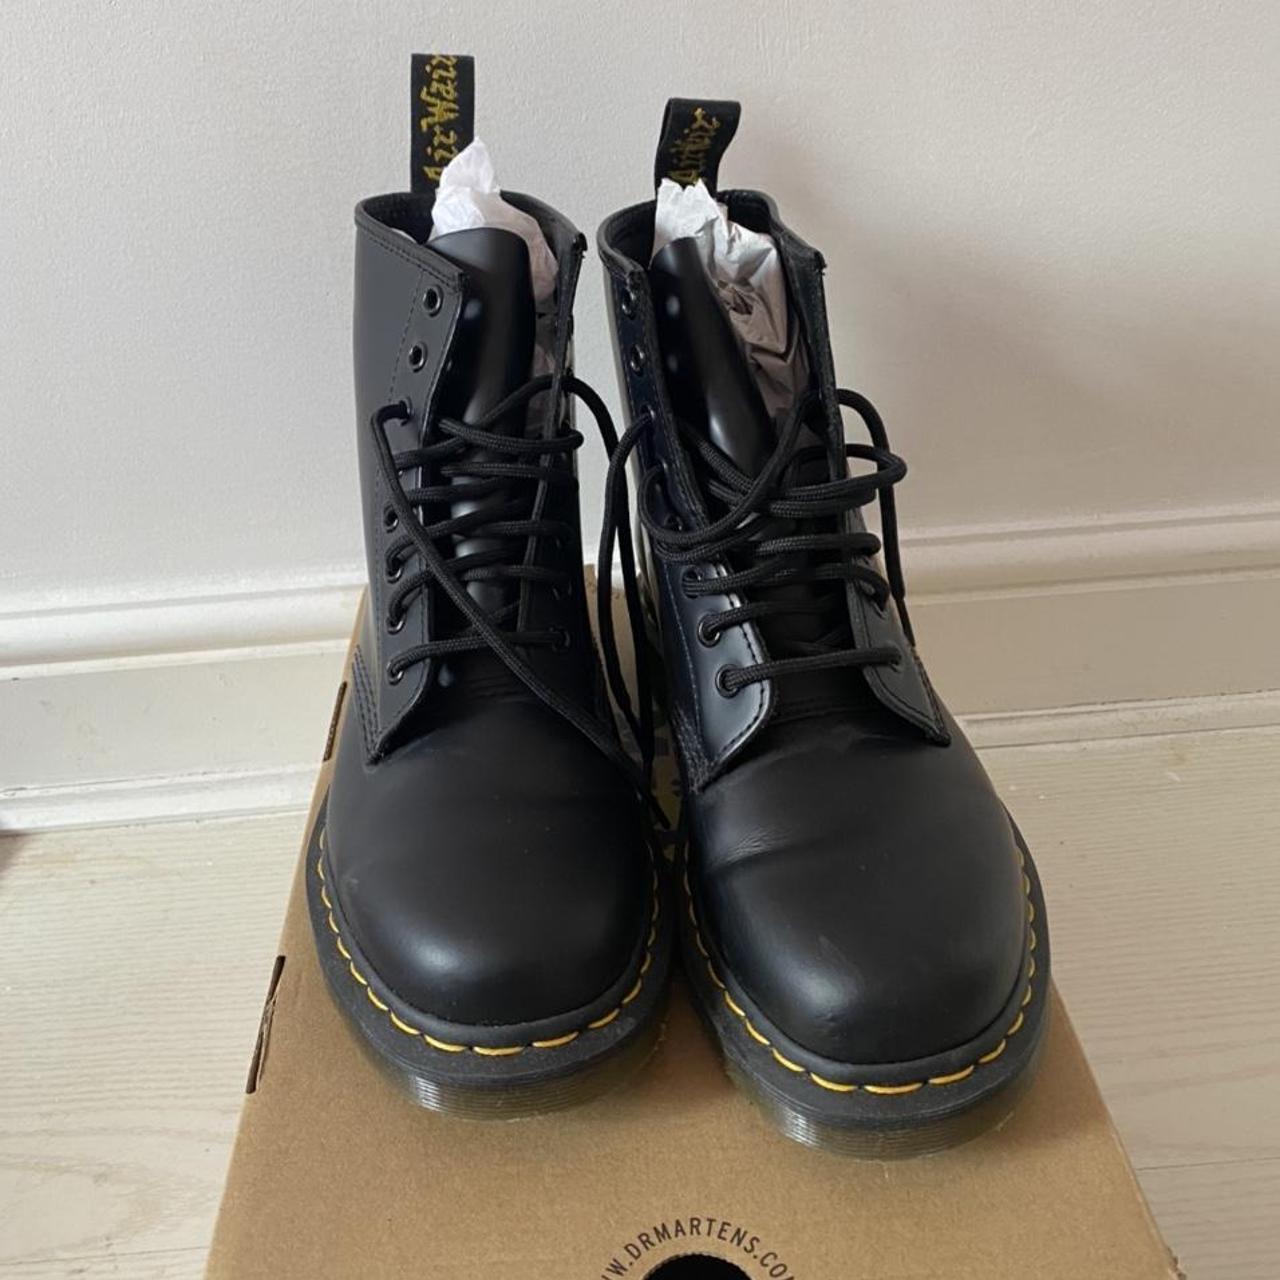 Dr. Martens - 1460 SMOOTH LEATHER LACE UP BOOTS,... - Depop